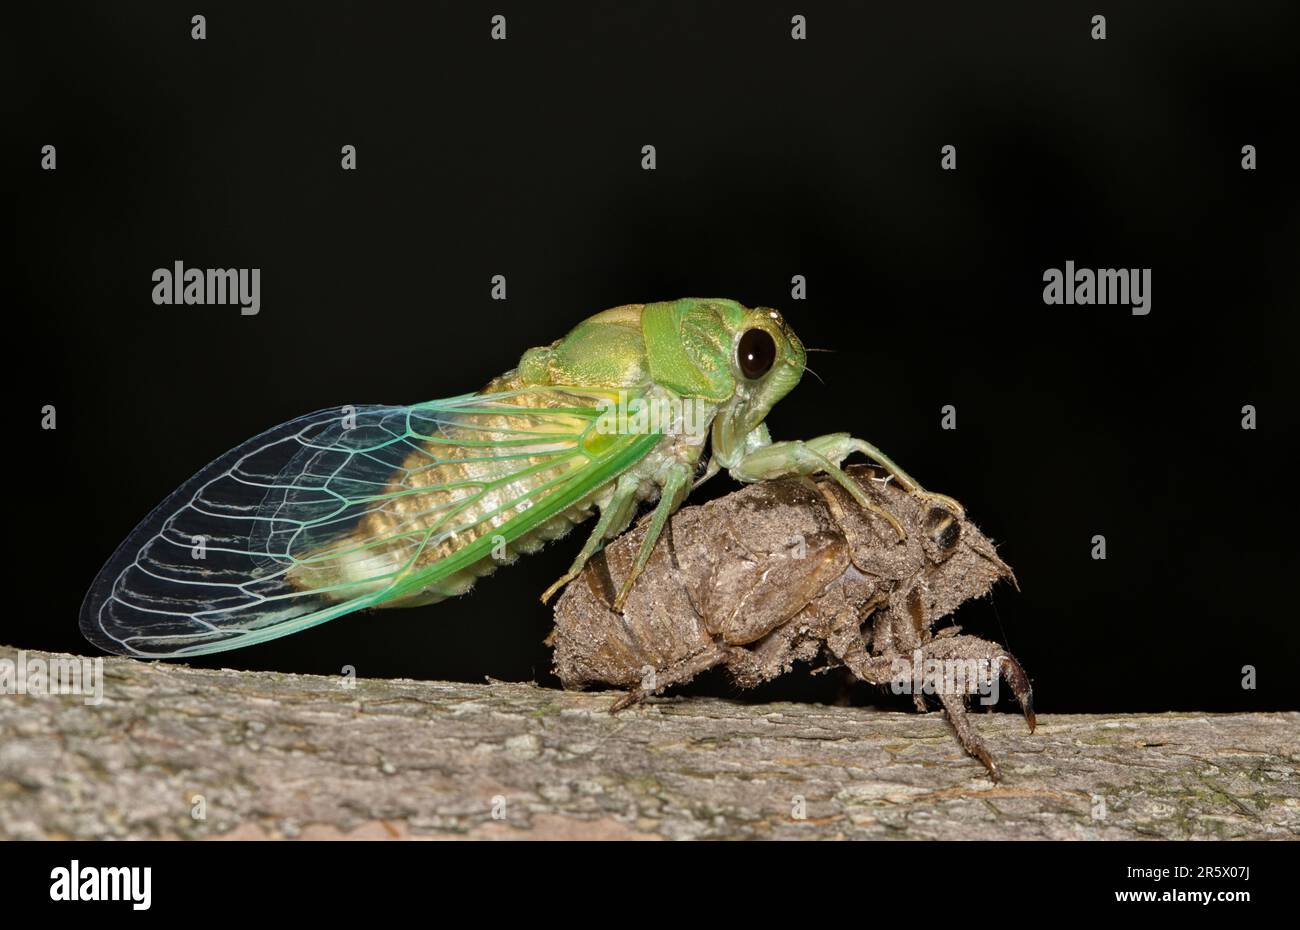 Cicada emerging from an exuvia shell on a Crepe Myrtle tree in Houston, TX at night. Common noisy insect found worldwide in the warmer months. Stock Photo